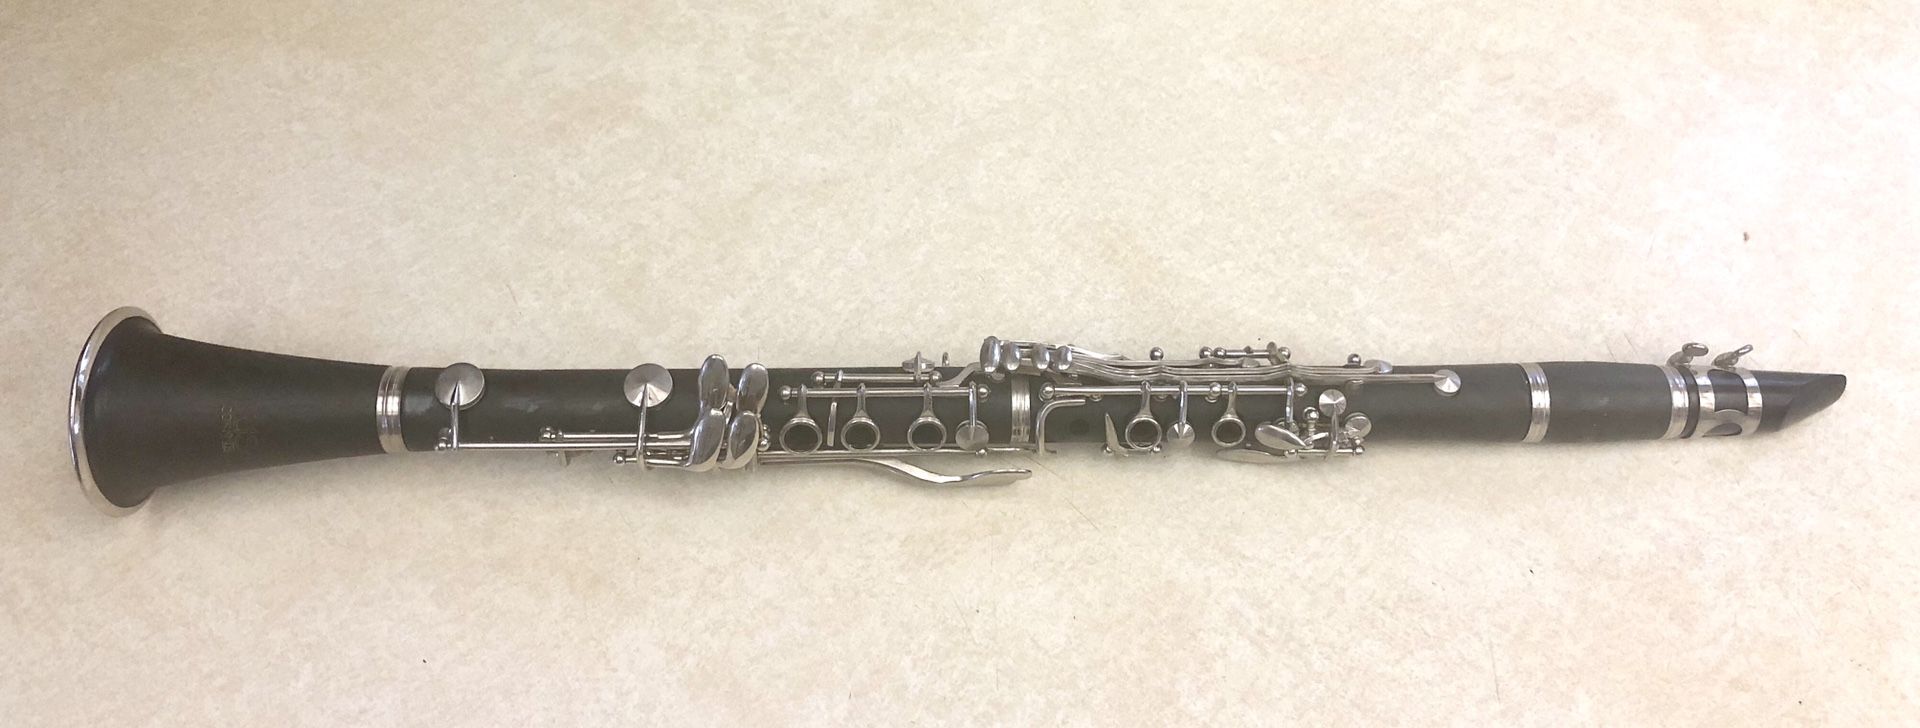 Opus Corsair Bb Student Clarinet Outfit Clarinet